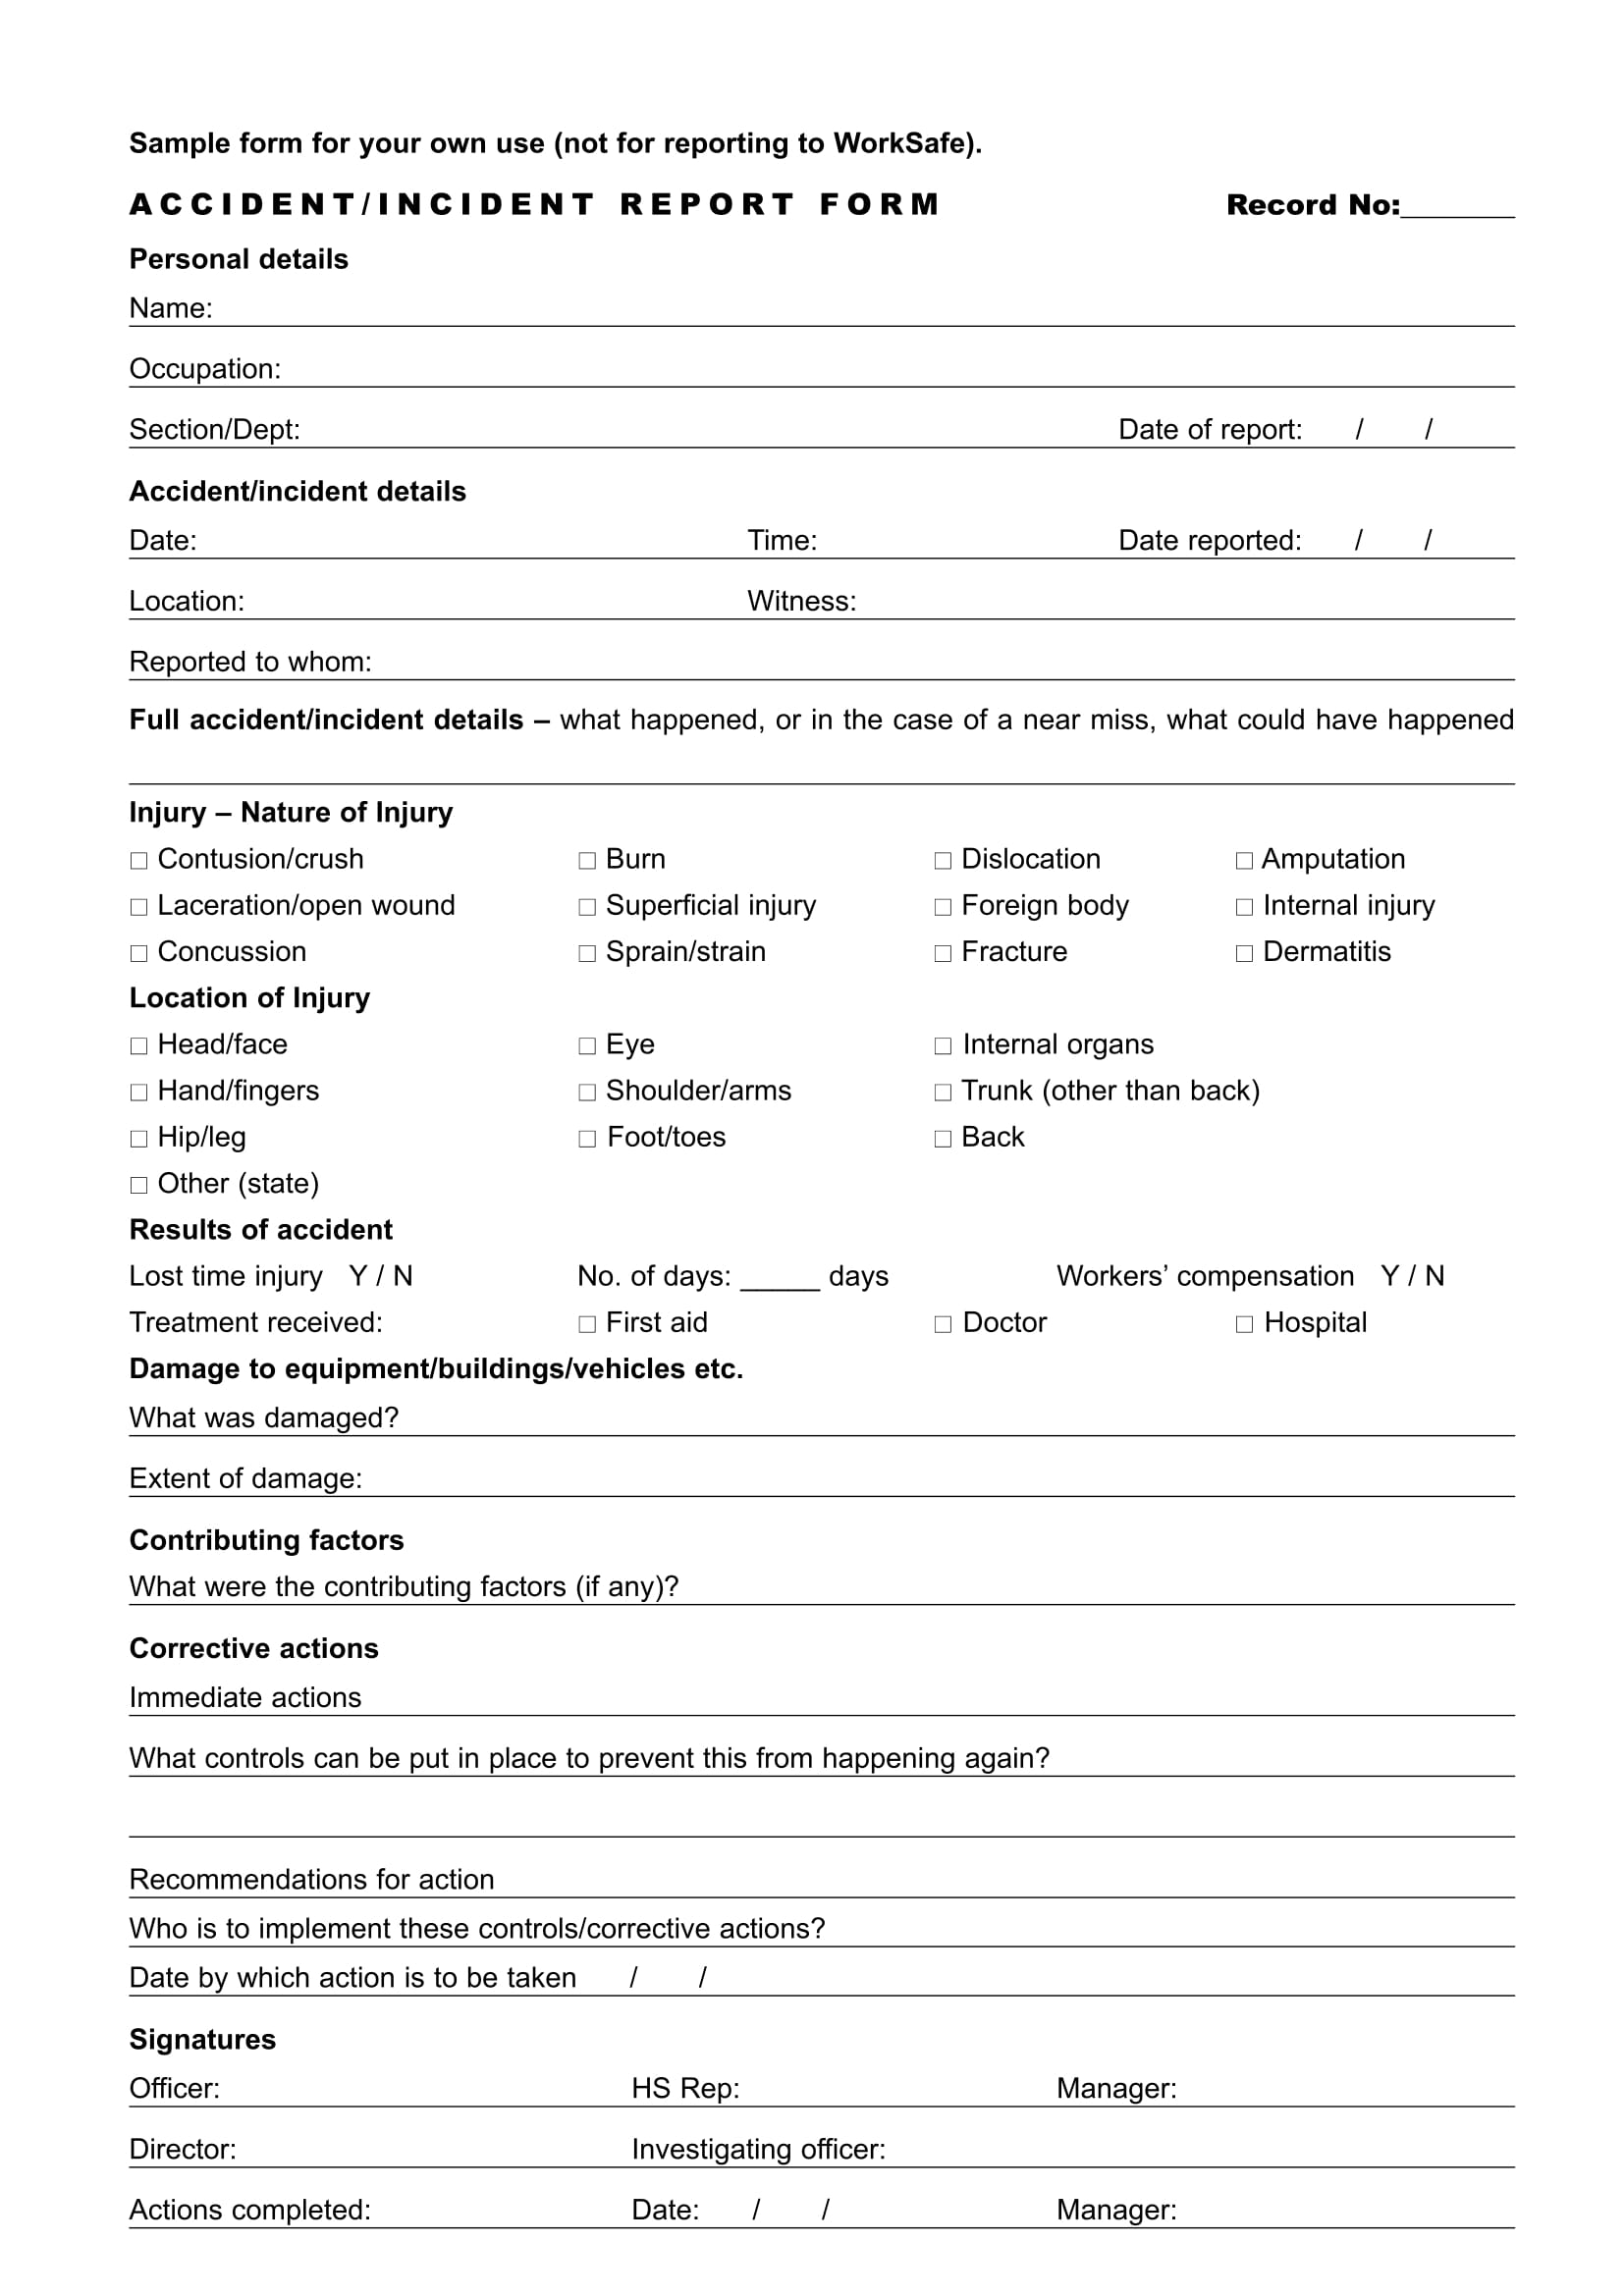 accident or incident report information form 1